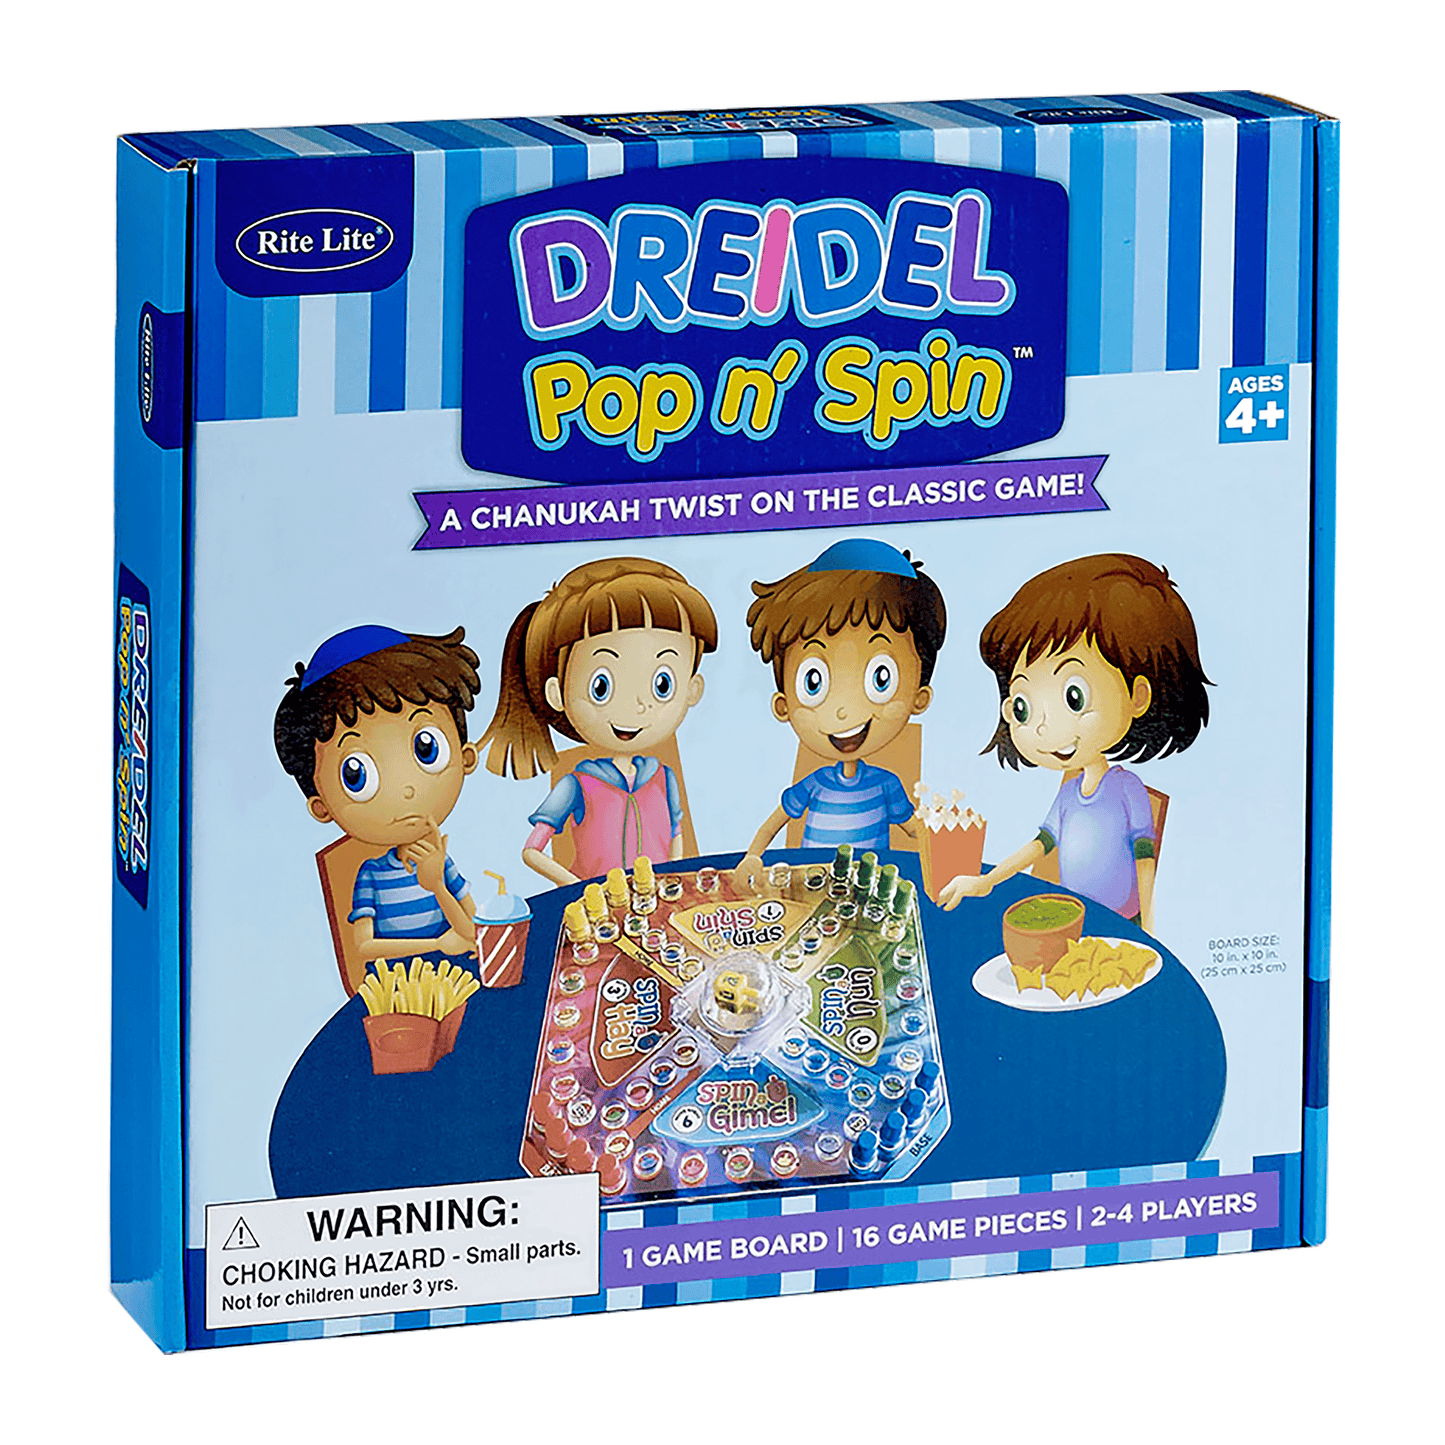 rite lite pop n' spin chanukah themed game with three children playing game on cover 